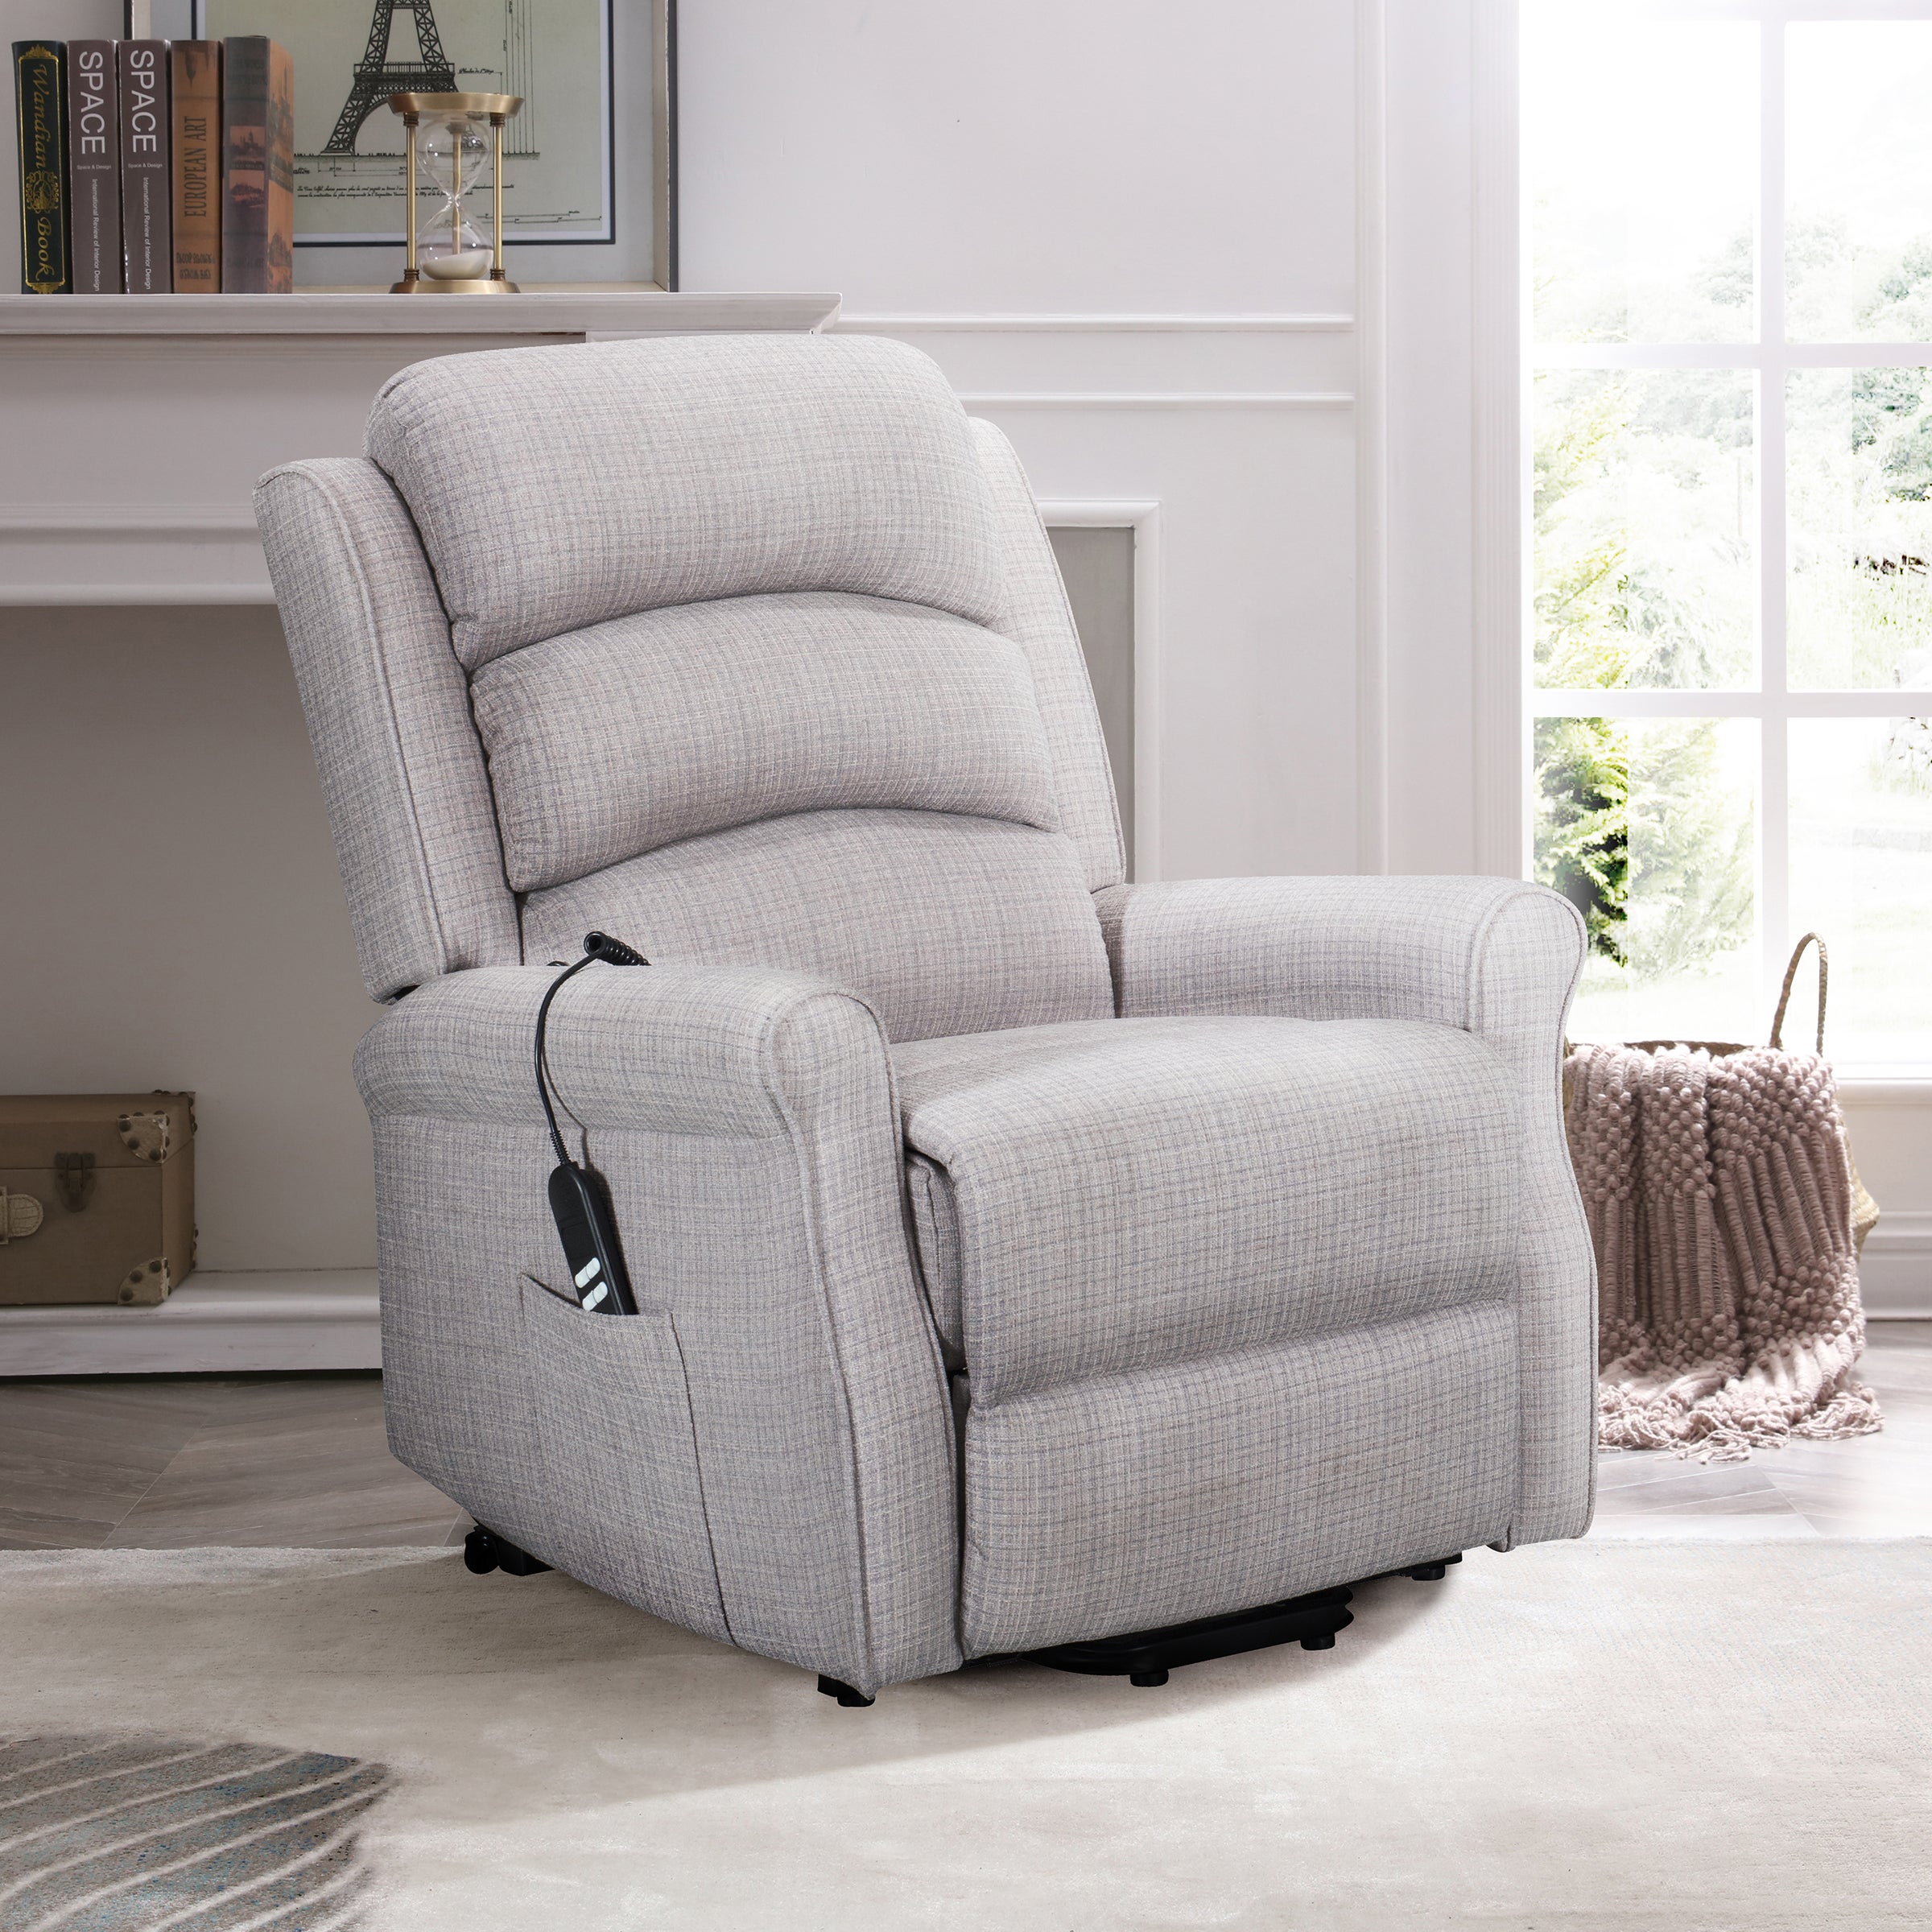 Ernest Twin Motor Rise and Recline Chair, Textured Weave